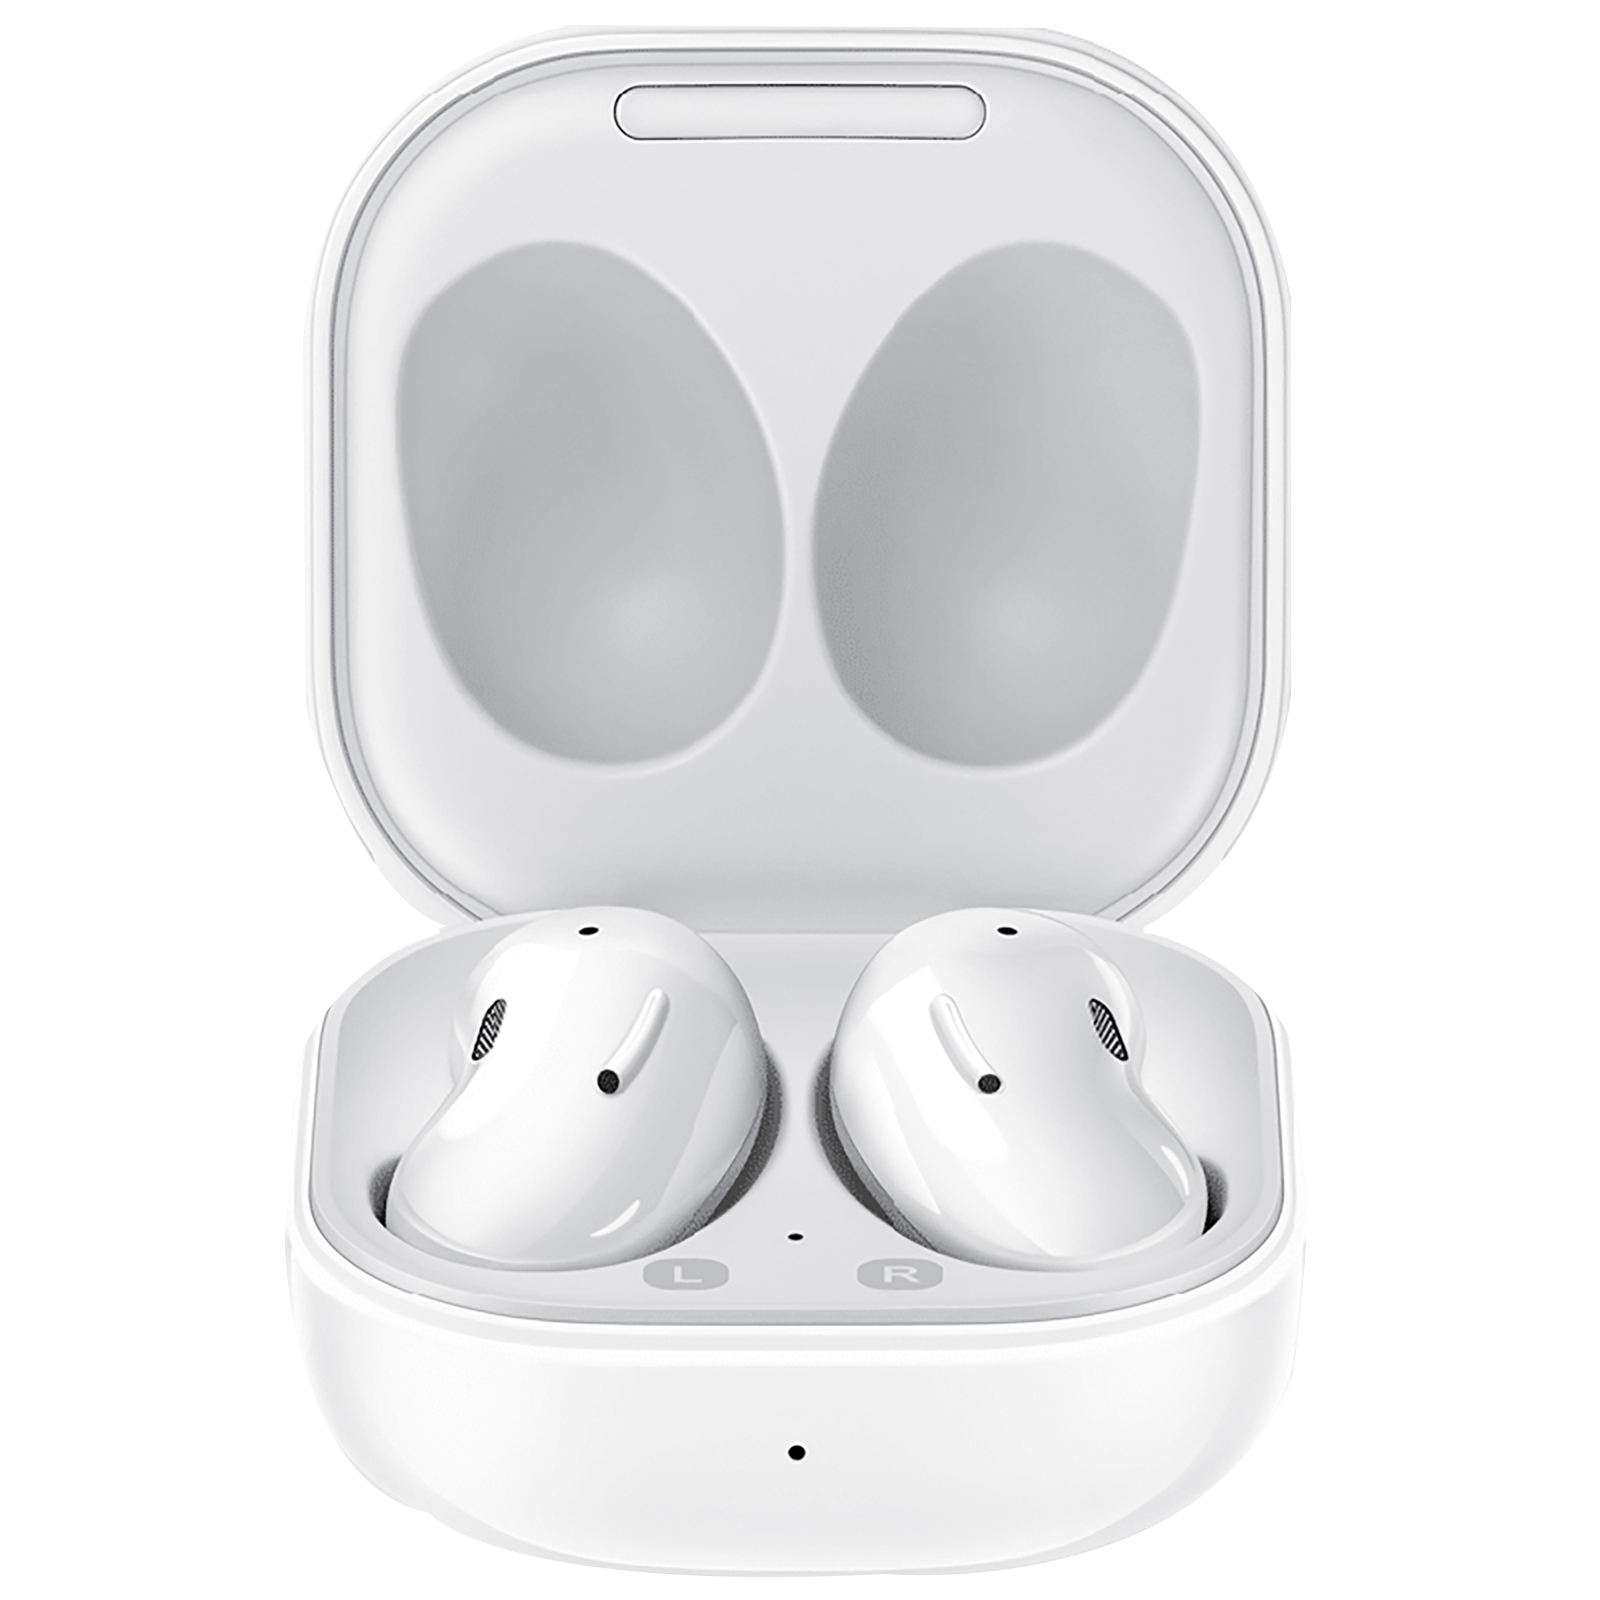 SAMSUNG Galaxy Buds Live SM-R180NZWAINU TWS Earbuds with Active Noise Cancellation (21 Hours Playback, Mystic White)